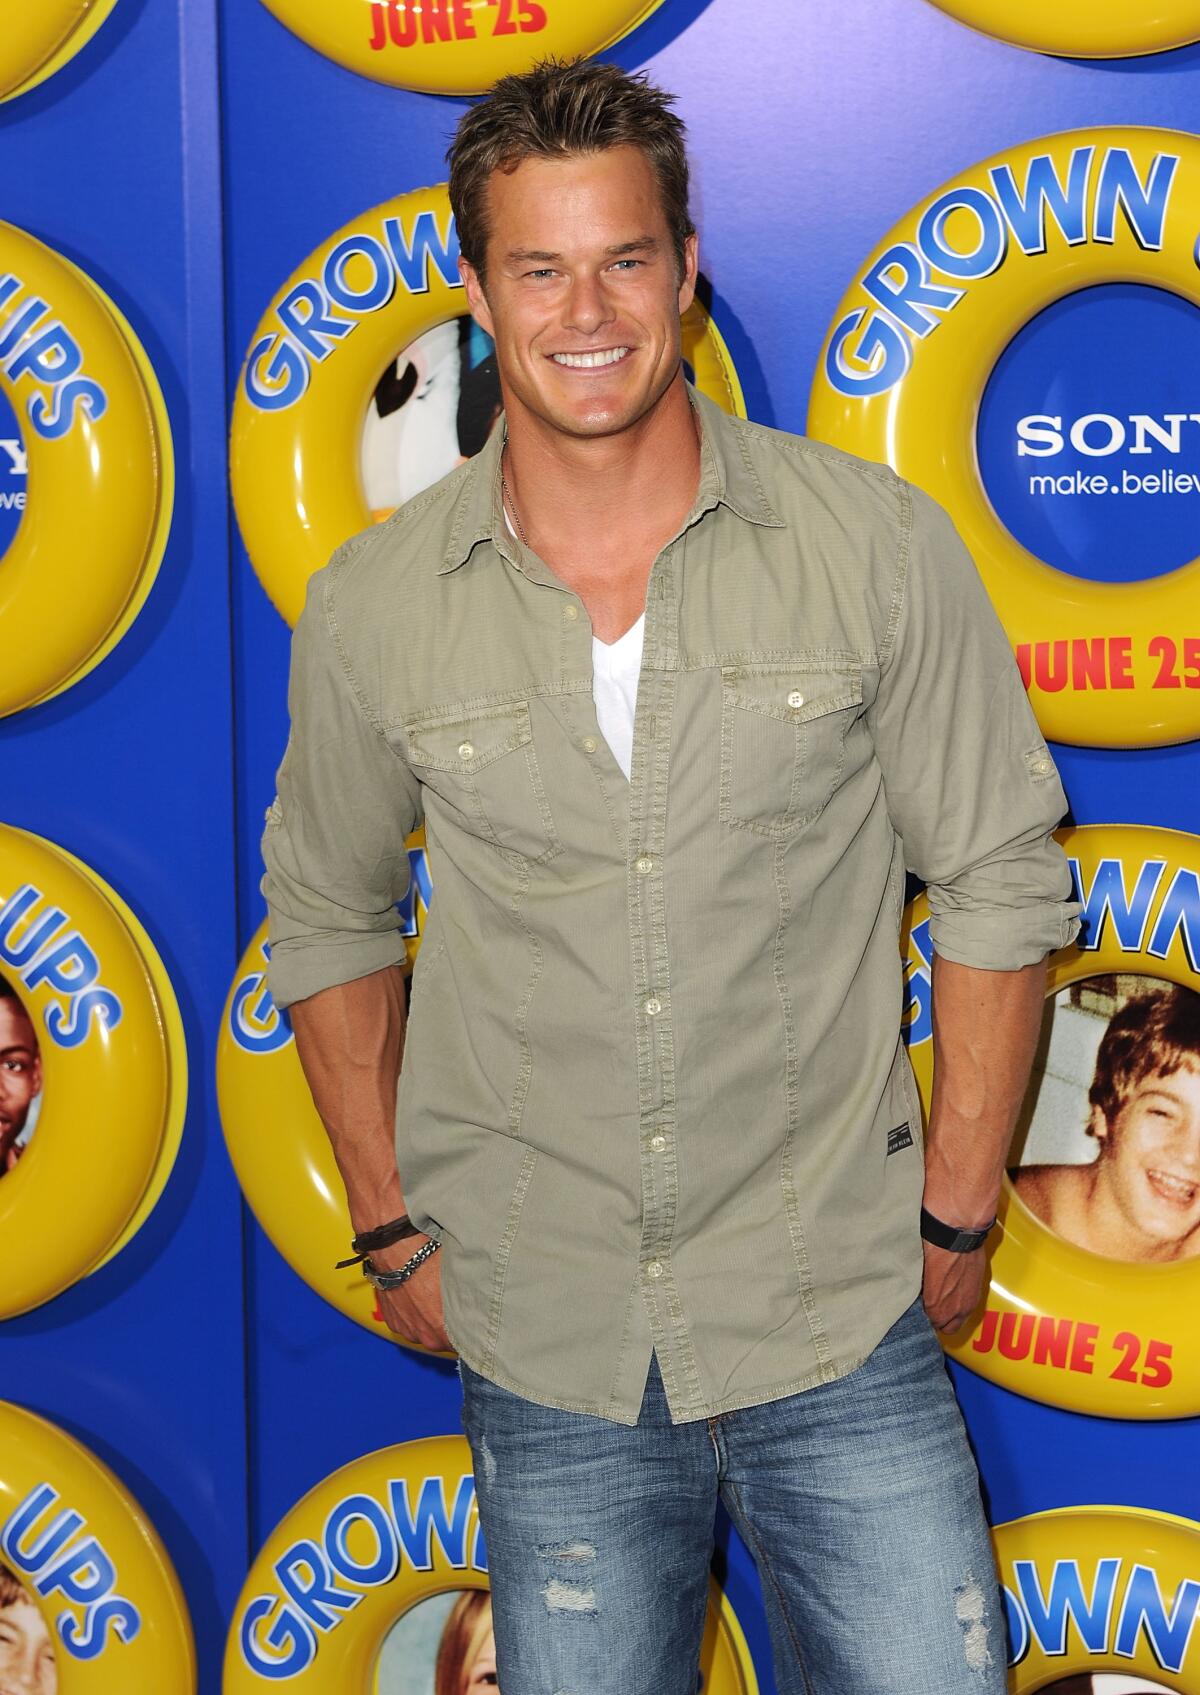 Alec Musser wears a khaki button-down shirt over a white shirt and blue jeans as he poses for photos in front of a backdrop